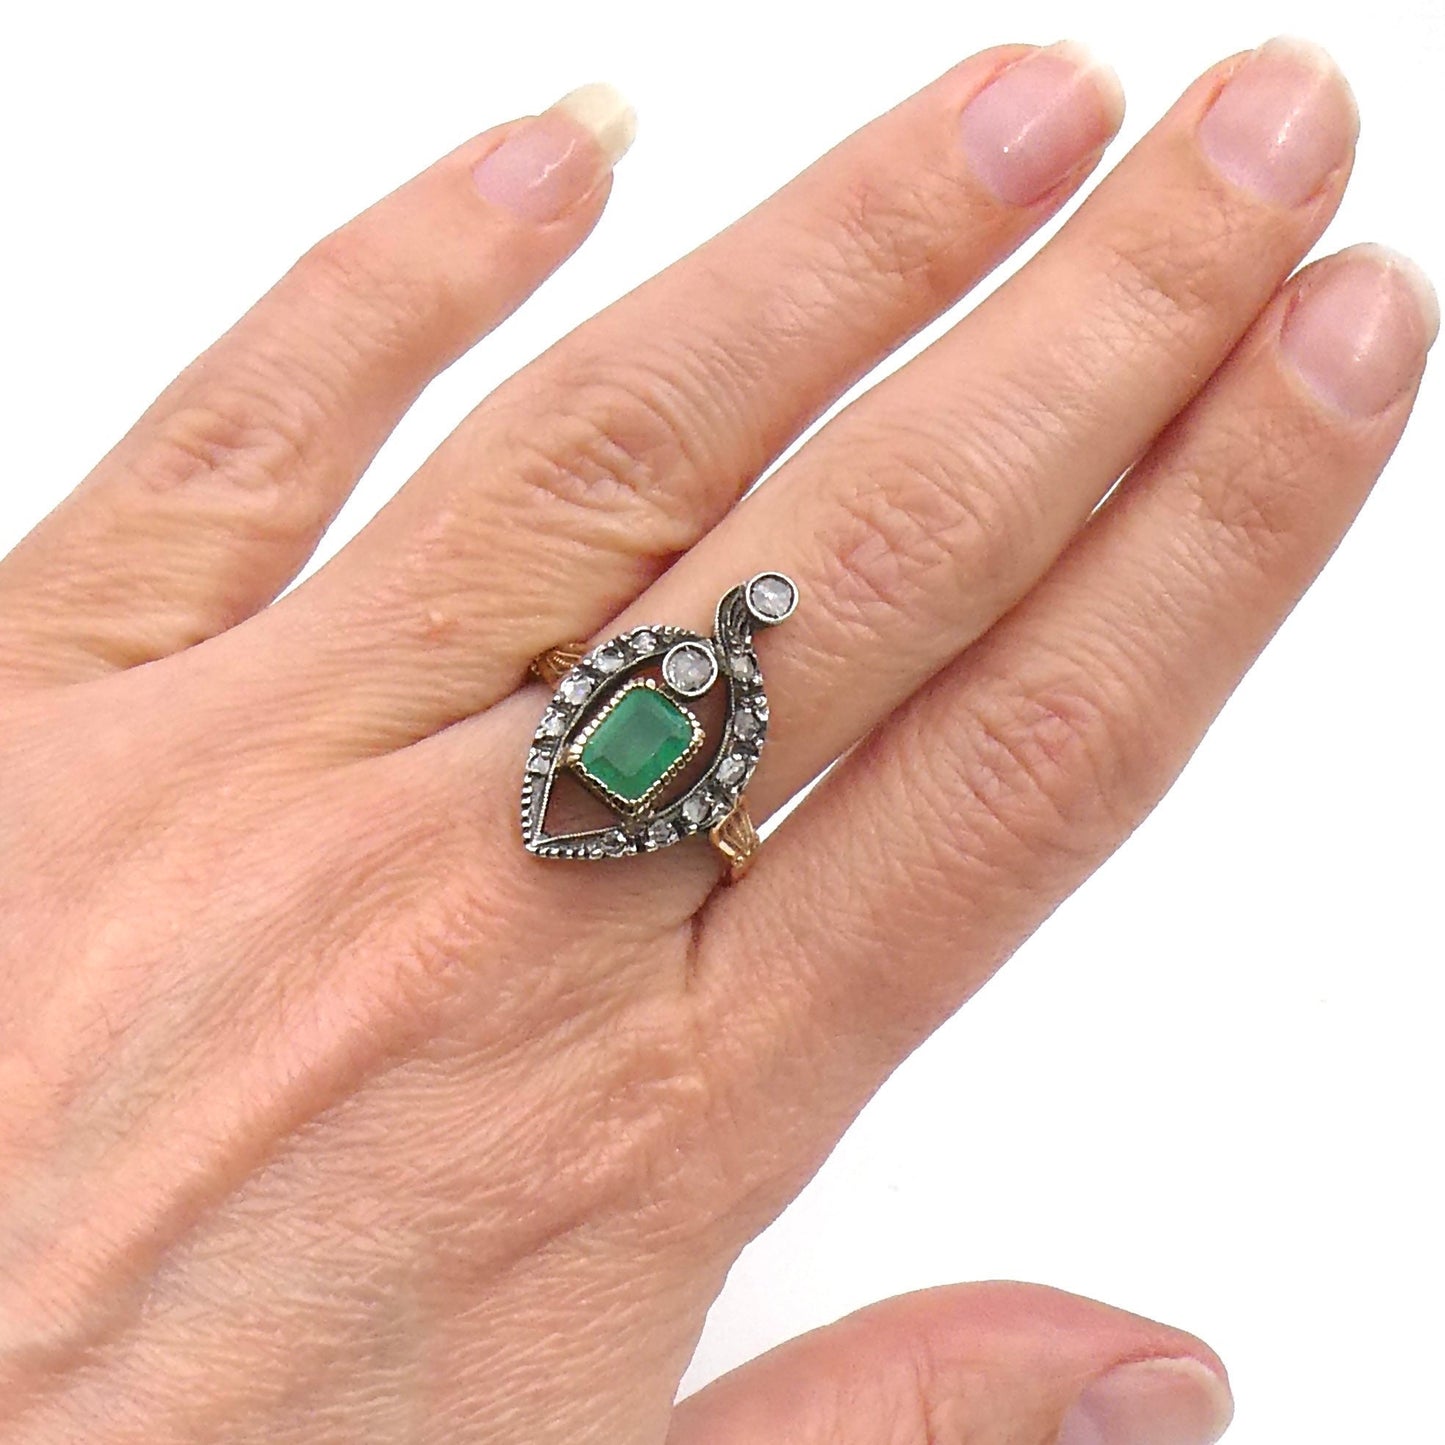 Vintage emerald diamond ring, a heart shaped design with old cut diamonds in gold, vintage emerald ring.